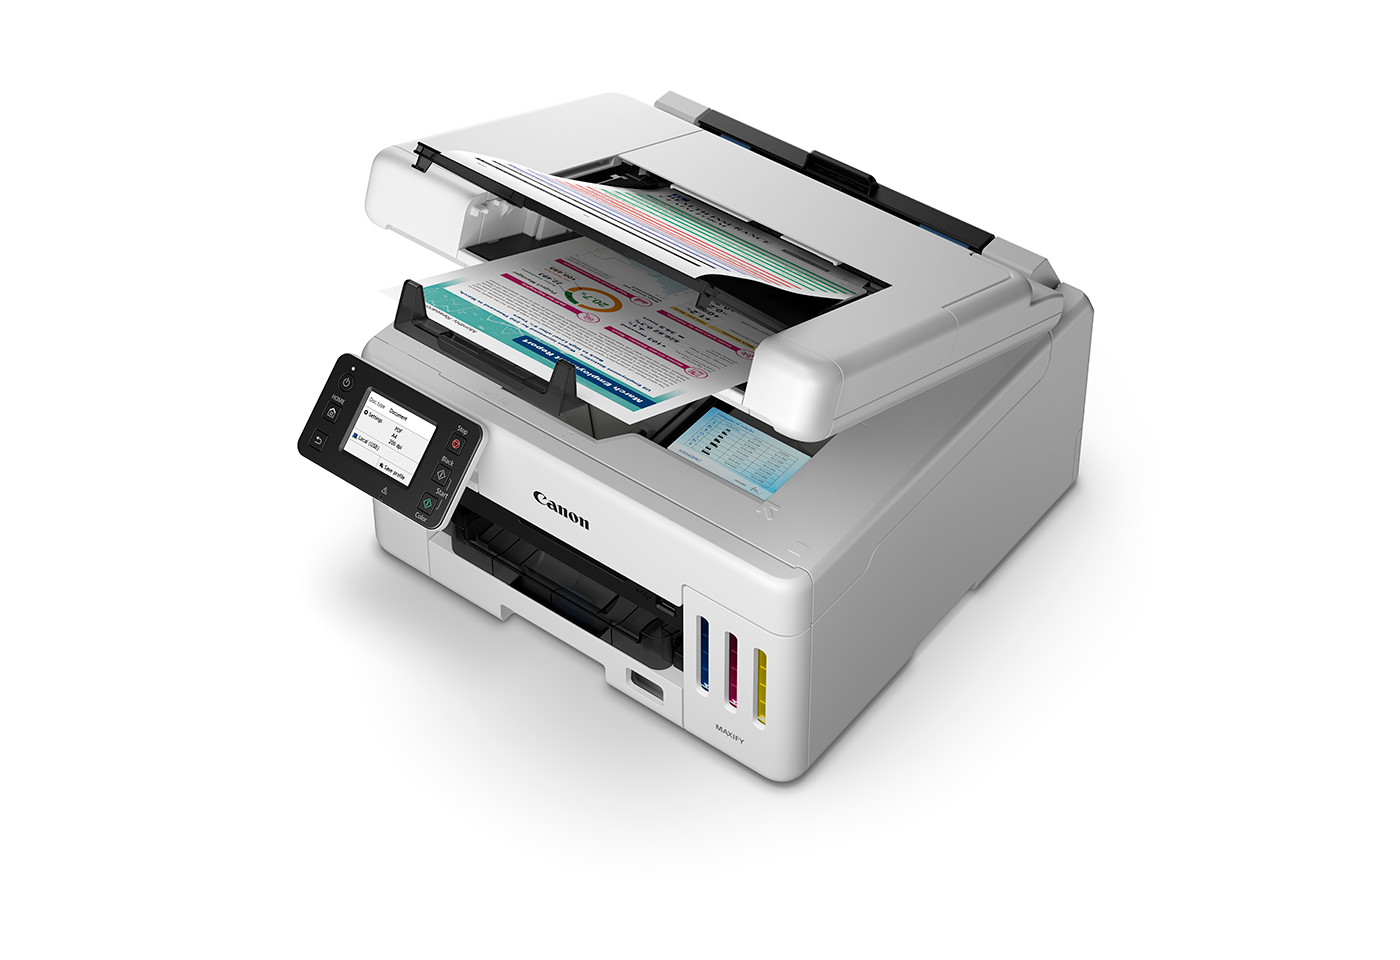 MAXIFY GX6560 MegaTank printer can keep up with your high-volume demands